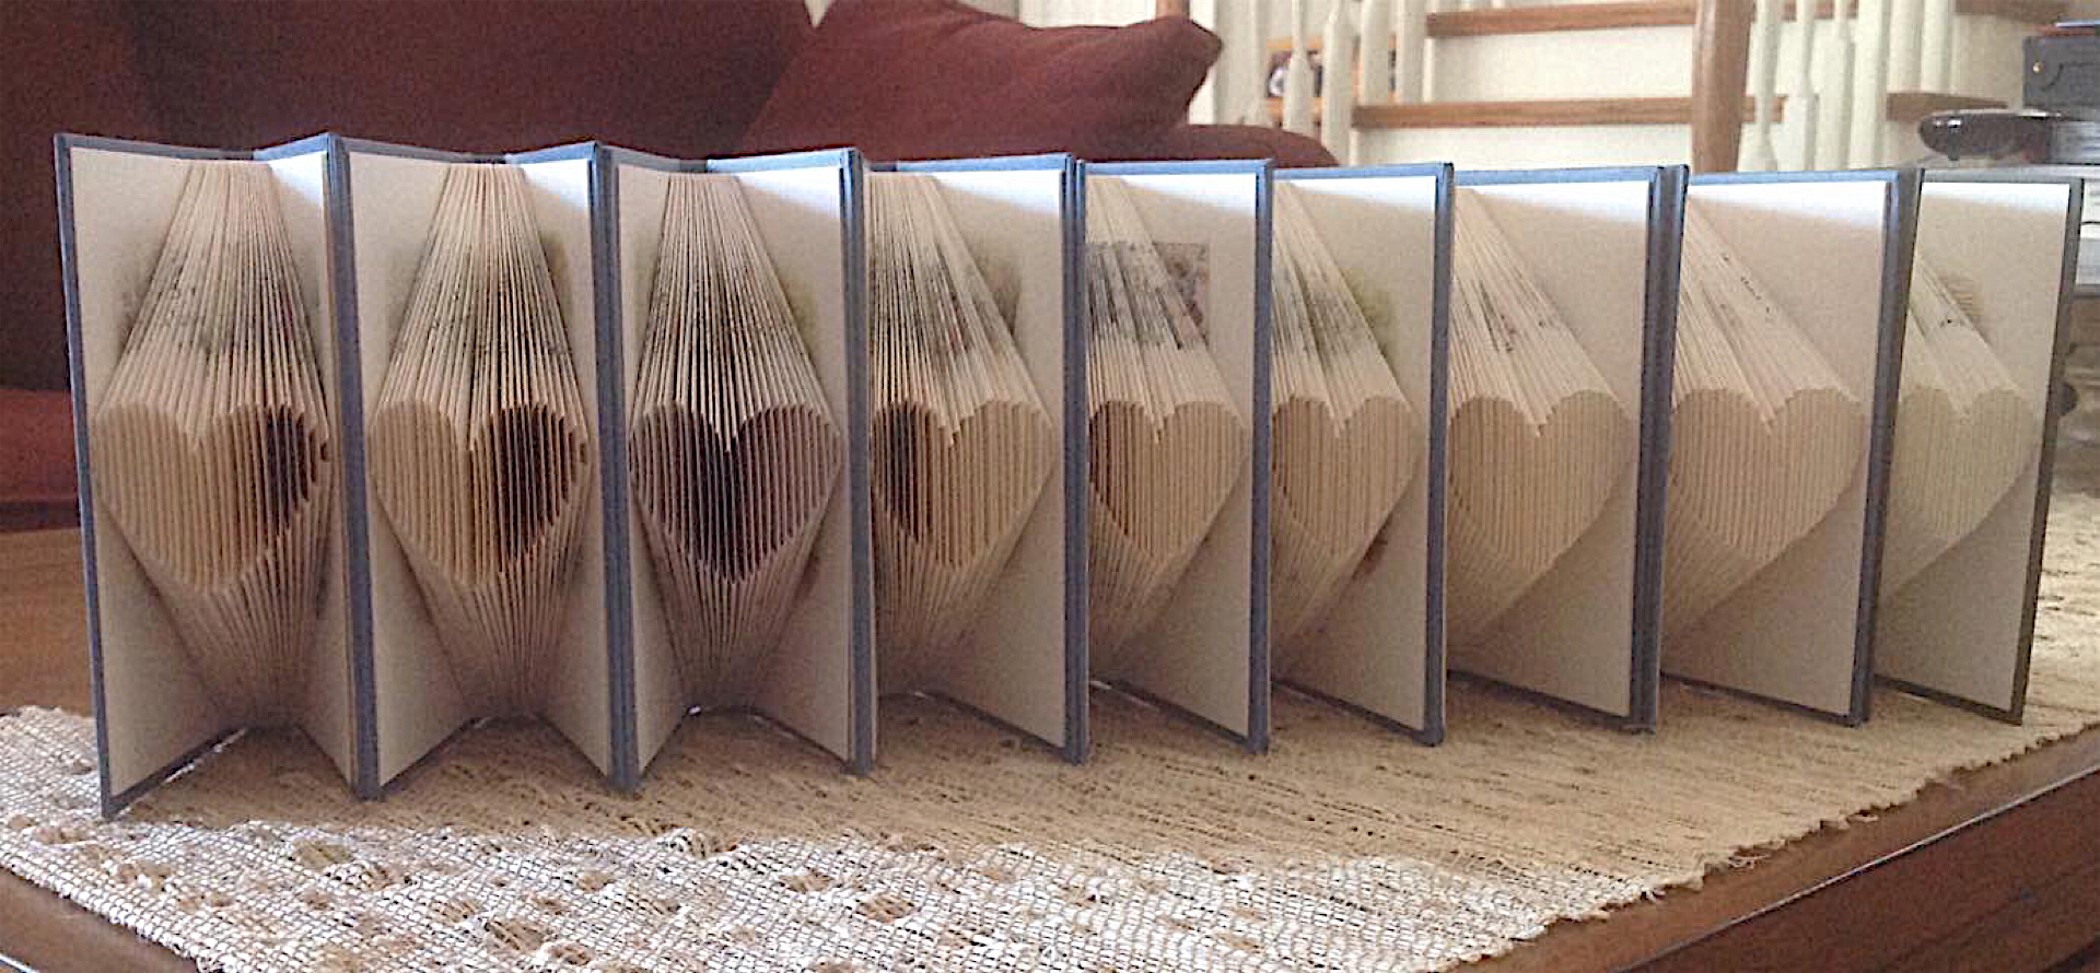 Books with pages folded into hearts